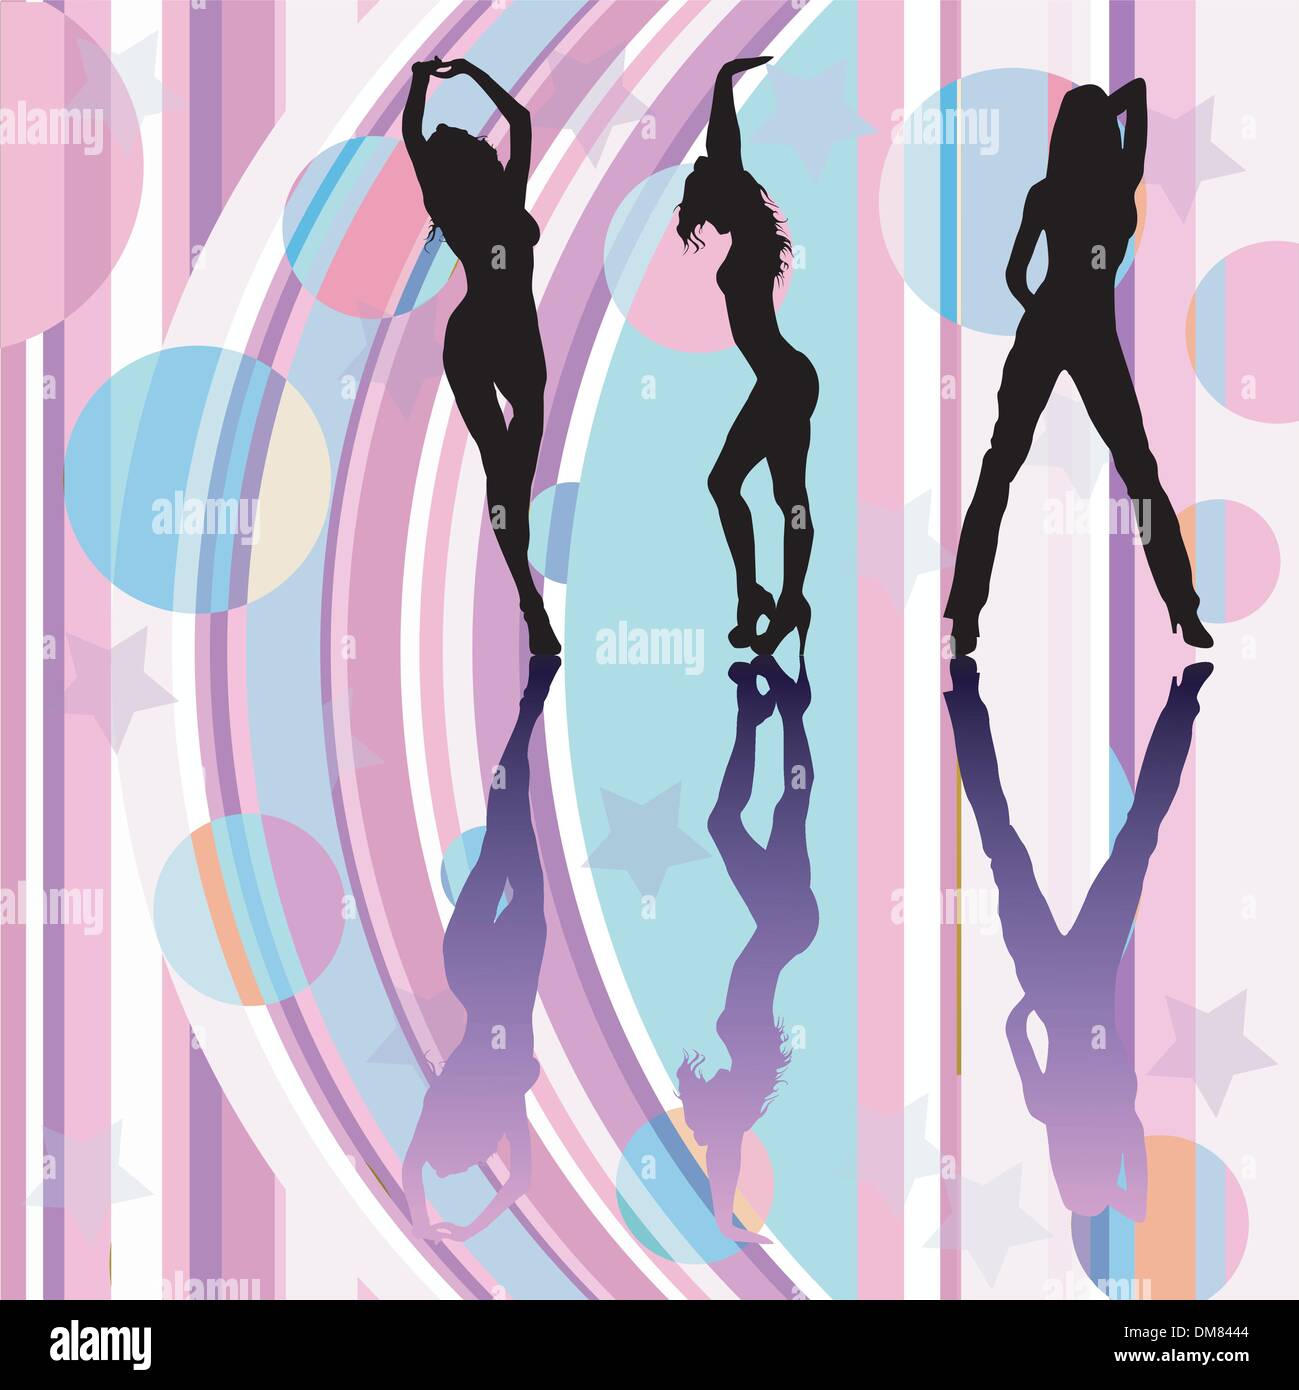 Dancing girls silhouettes on discoteque atmosphere Stock Vector